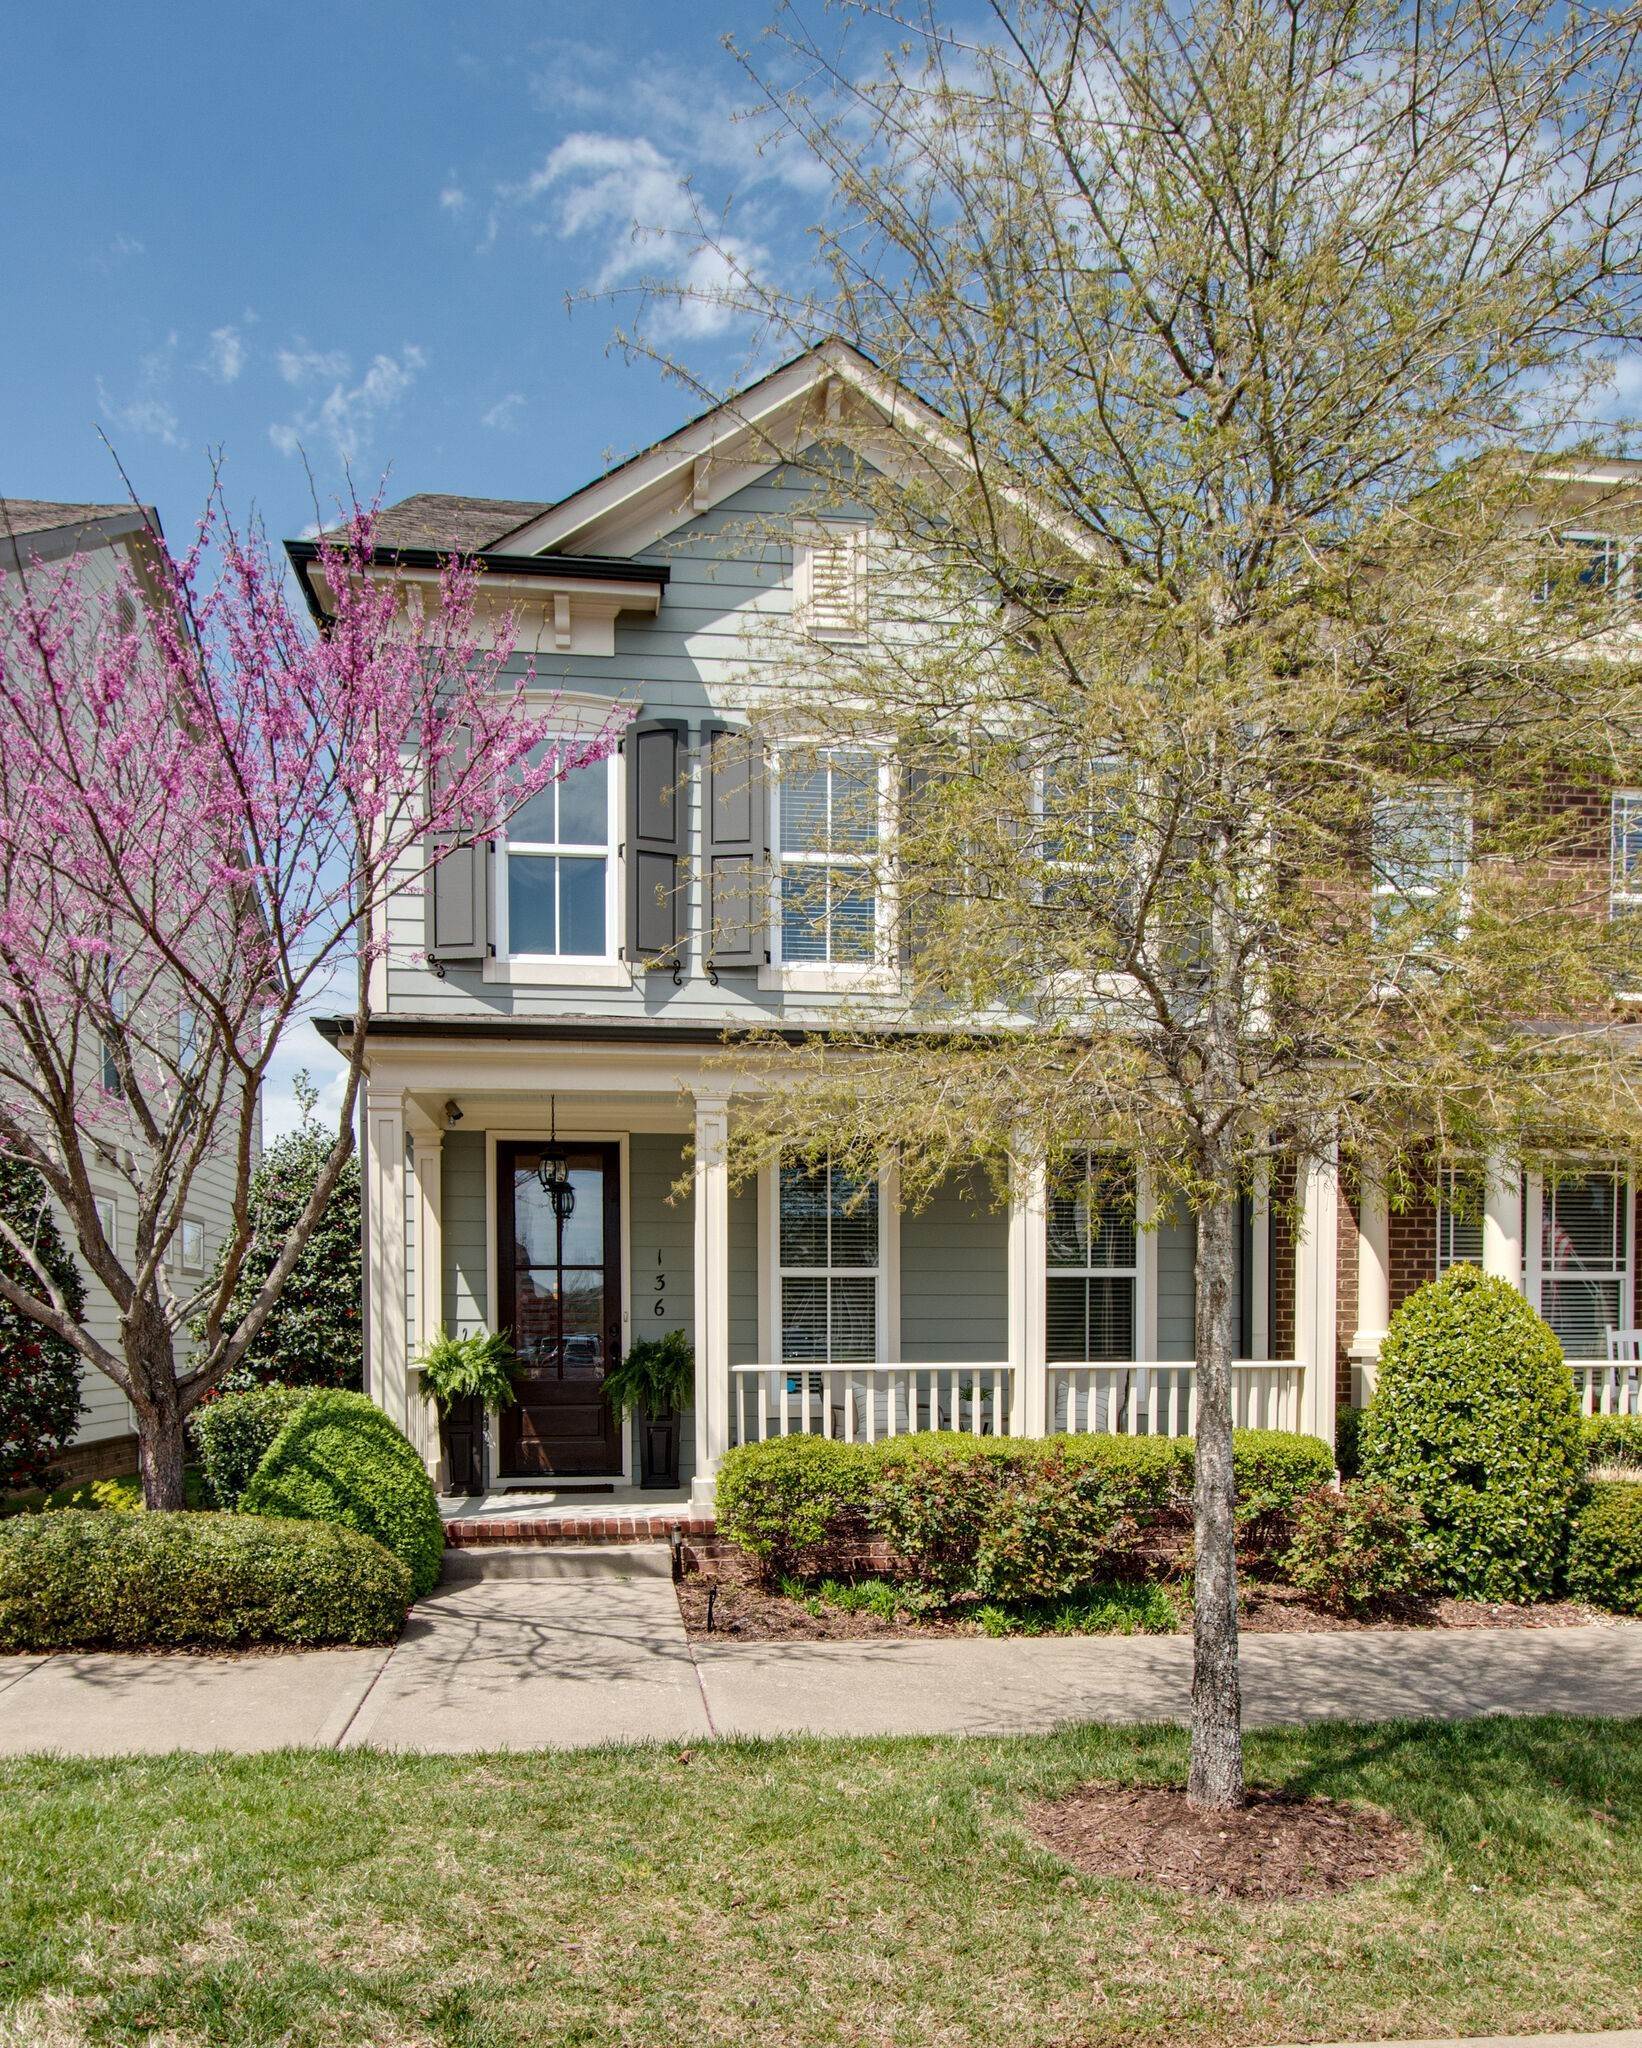 Townhouse at 136 Prospect Avenue Franklin, Tennessee 37064 United States